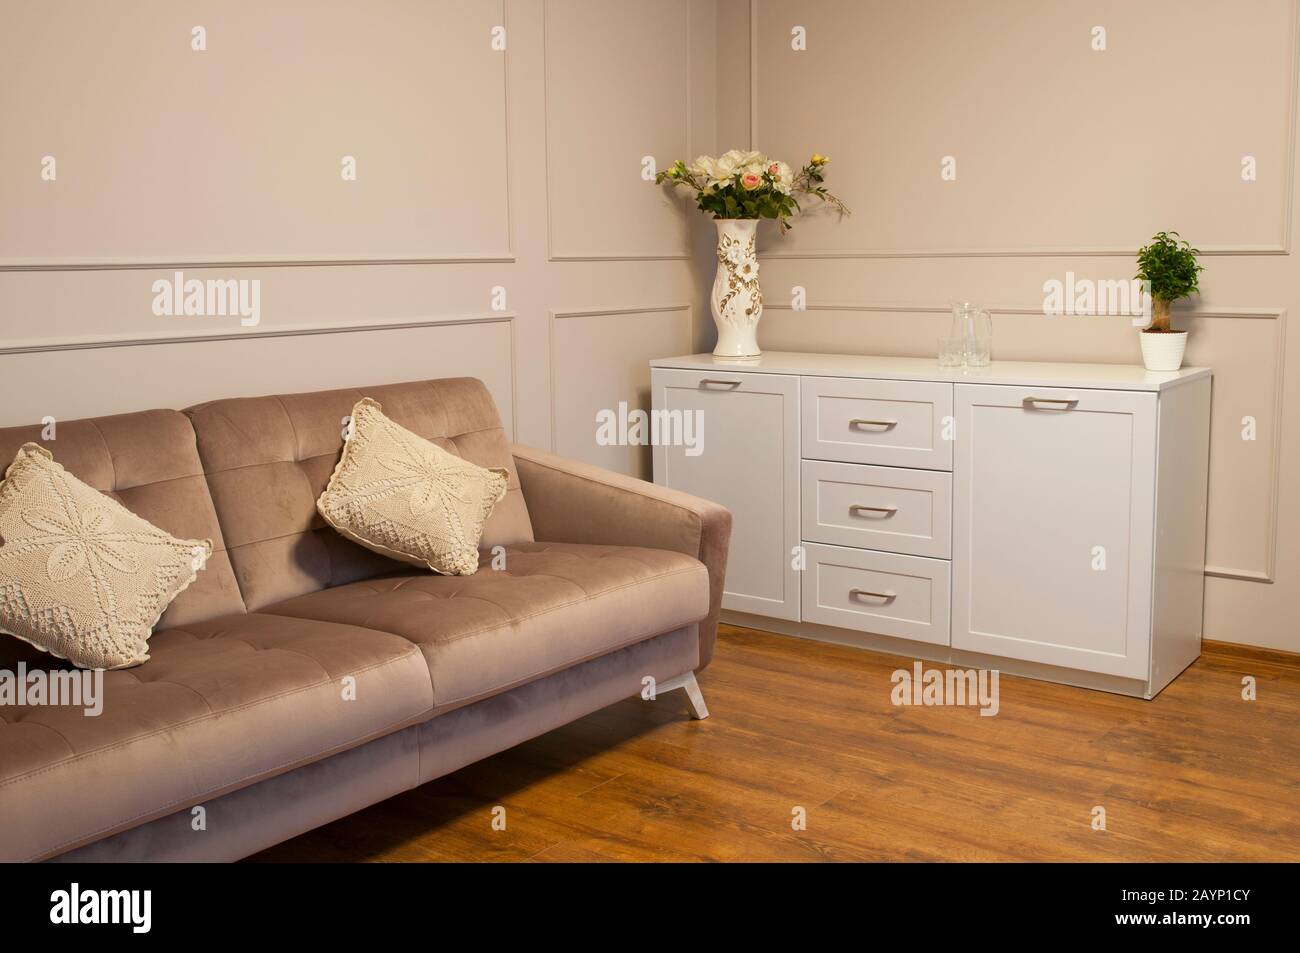 modern interior with sofa and flower vase Stock Photo